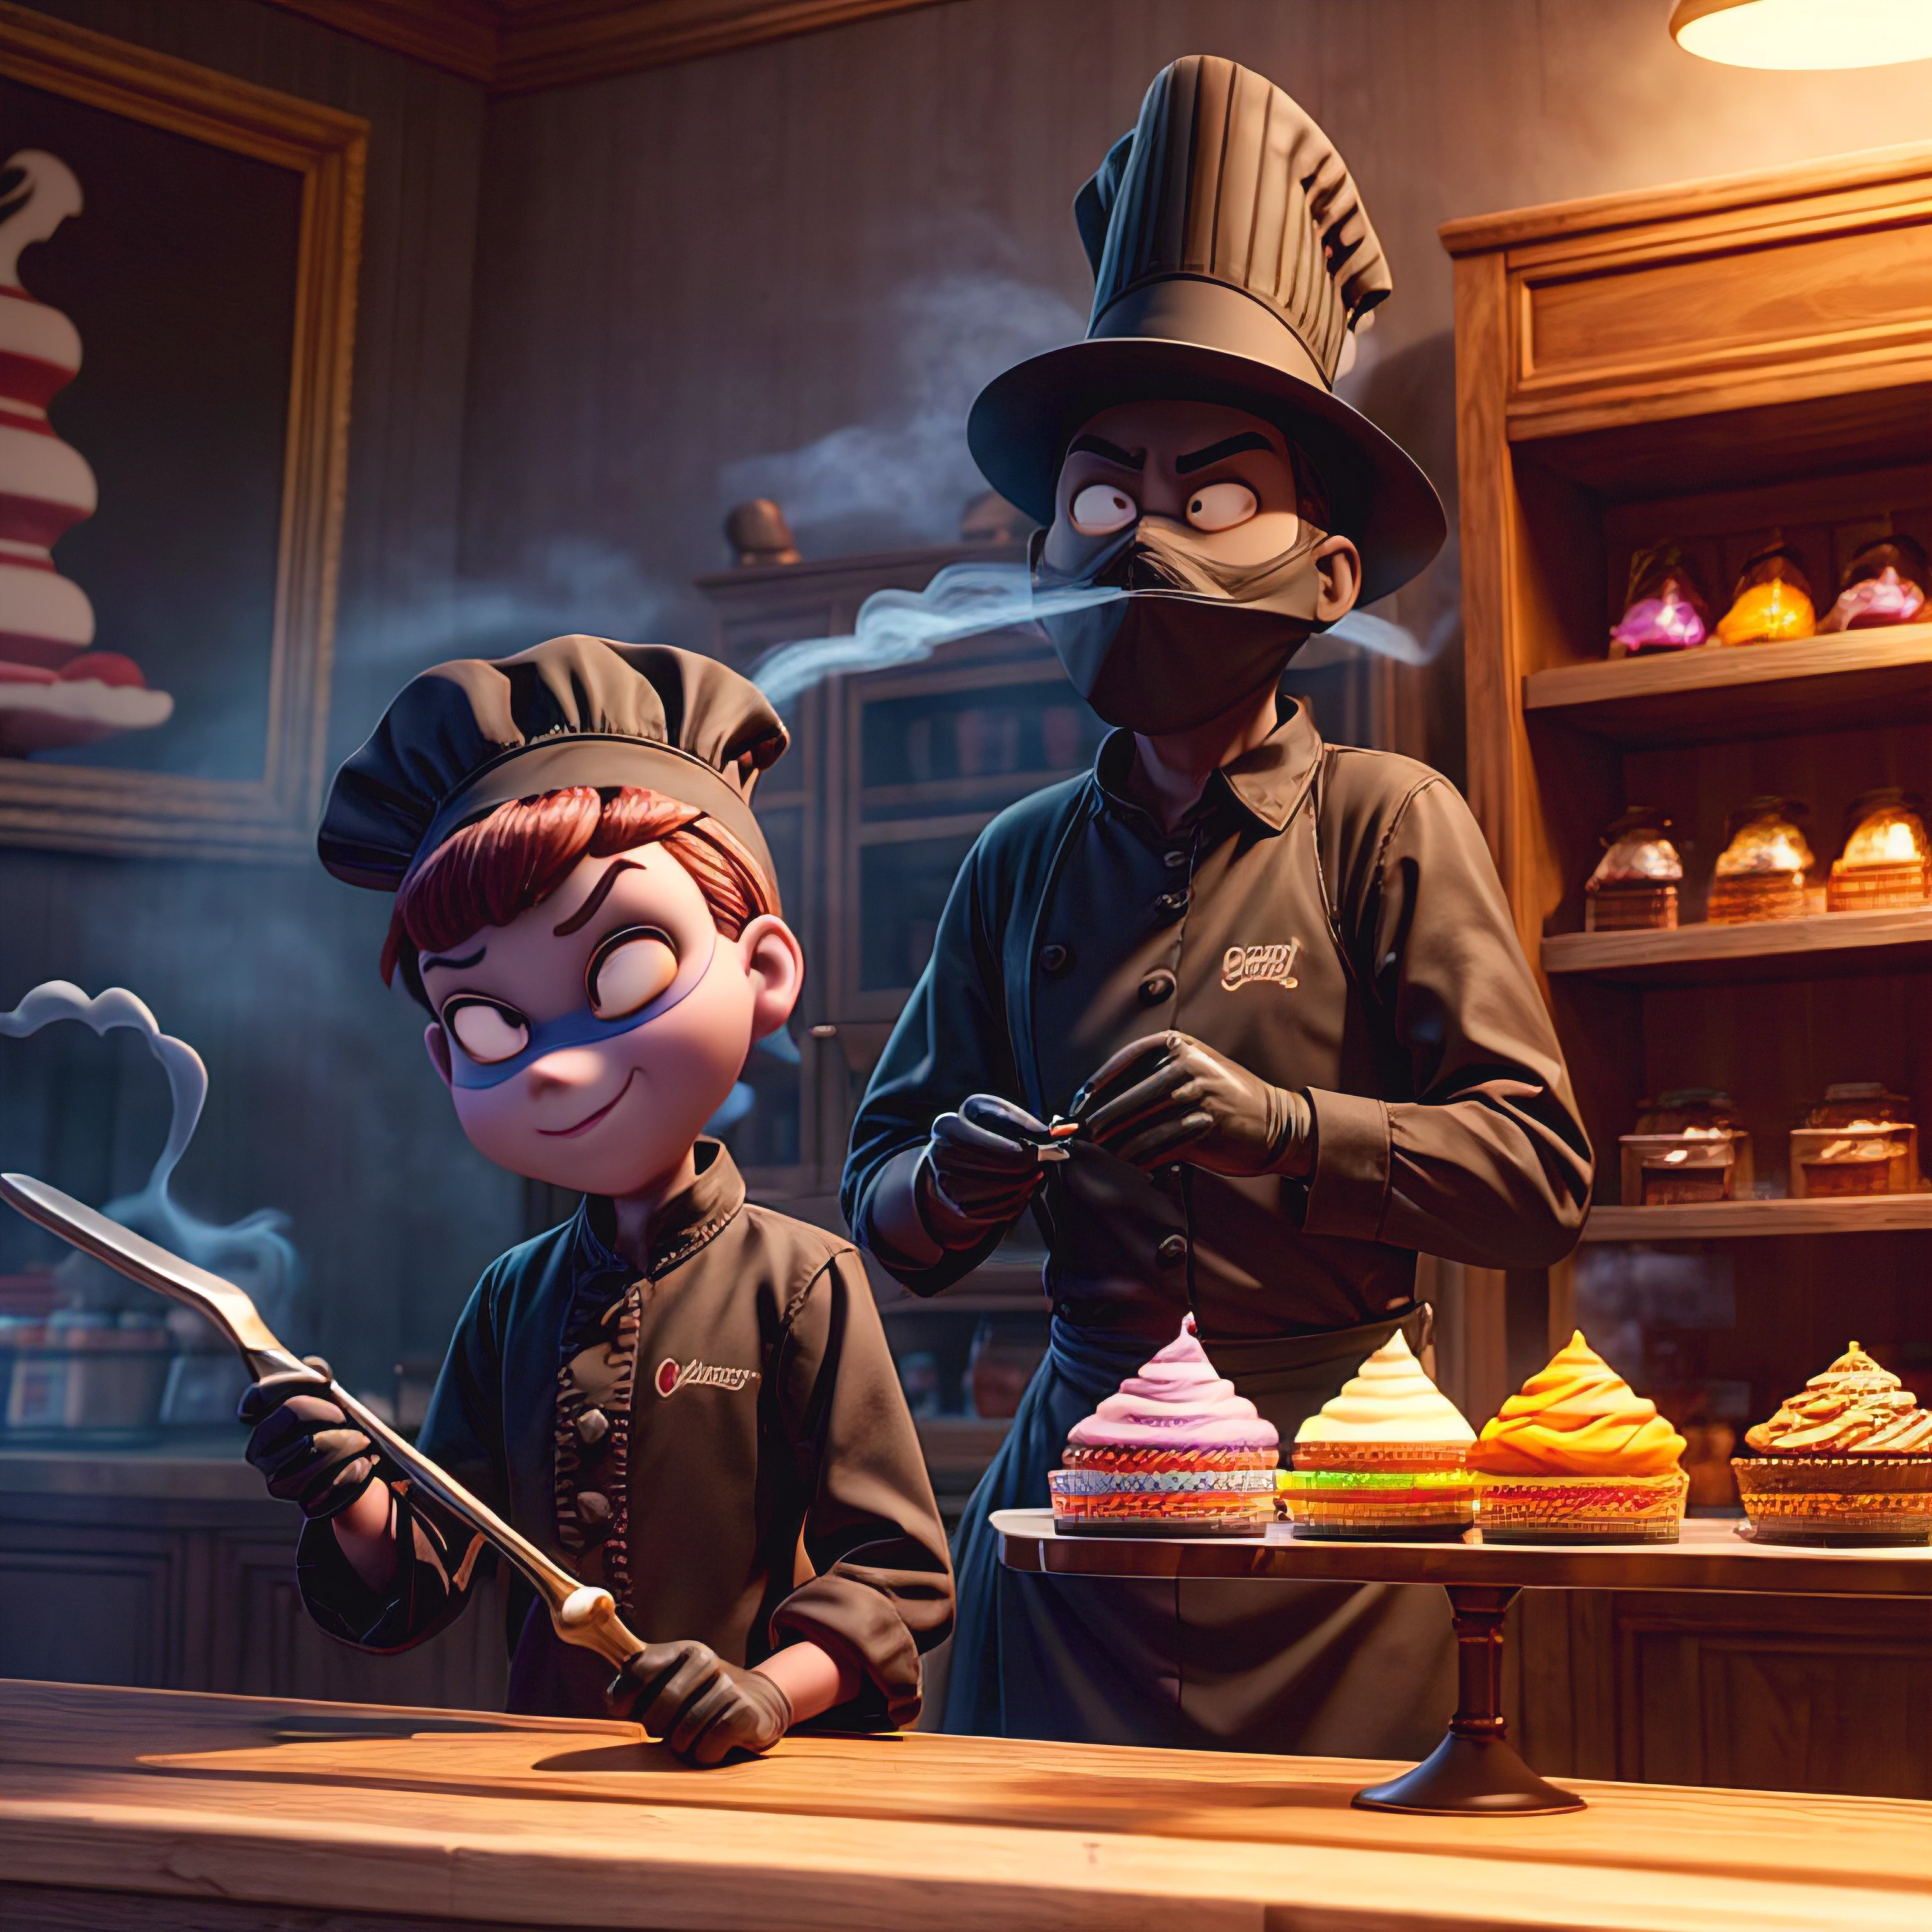 pixAr style, A (shAdowy smoke monster) posing As A (糖果商) behind A register on A counter in A cAndy shop, chef-hAt, (low Angle), detAiled, 高分辨率, high quAlity, 8千, high sAturAtion, 不祥的, hiding in plAin sight